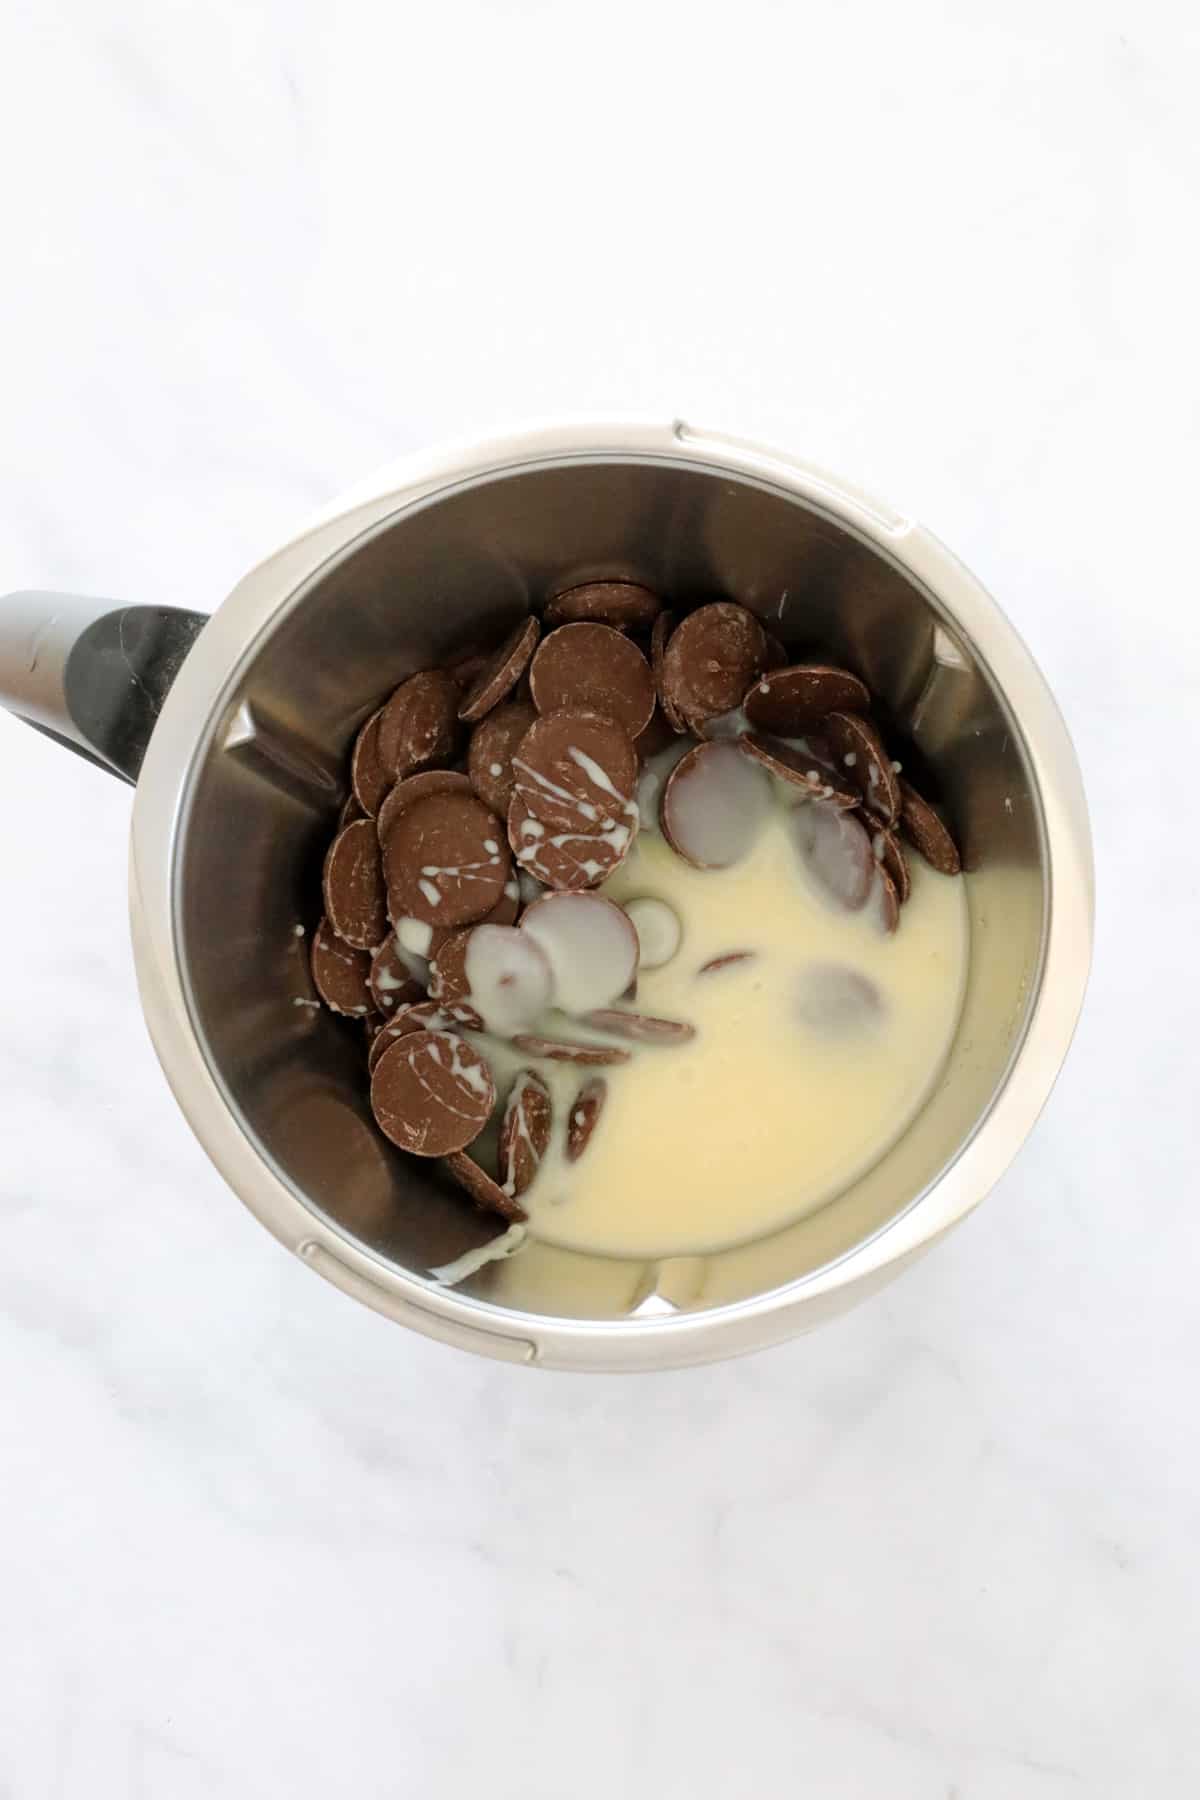 Sweetened condensed milk and chocolate in a Thermomix bowl.